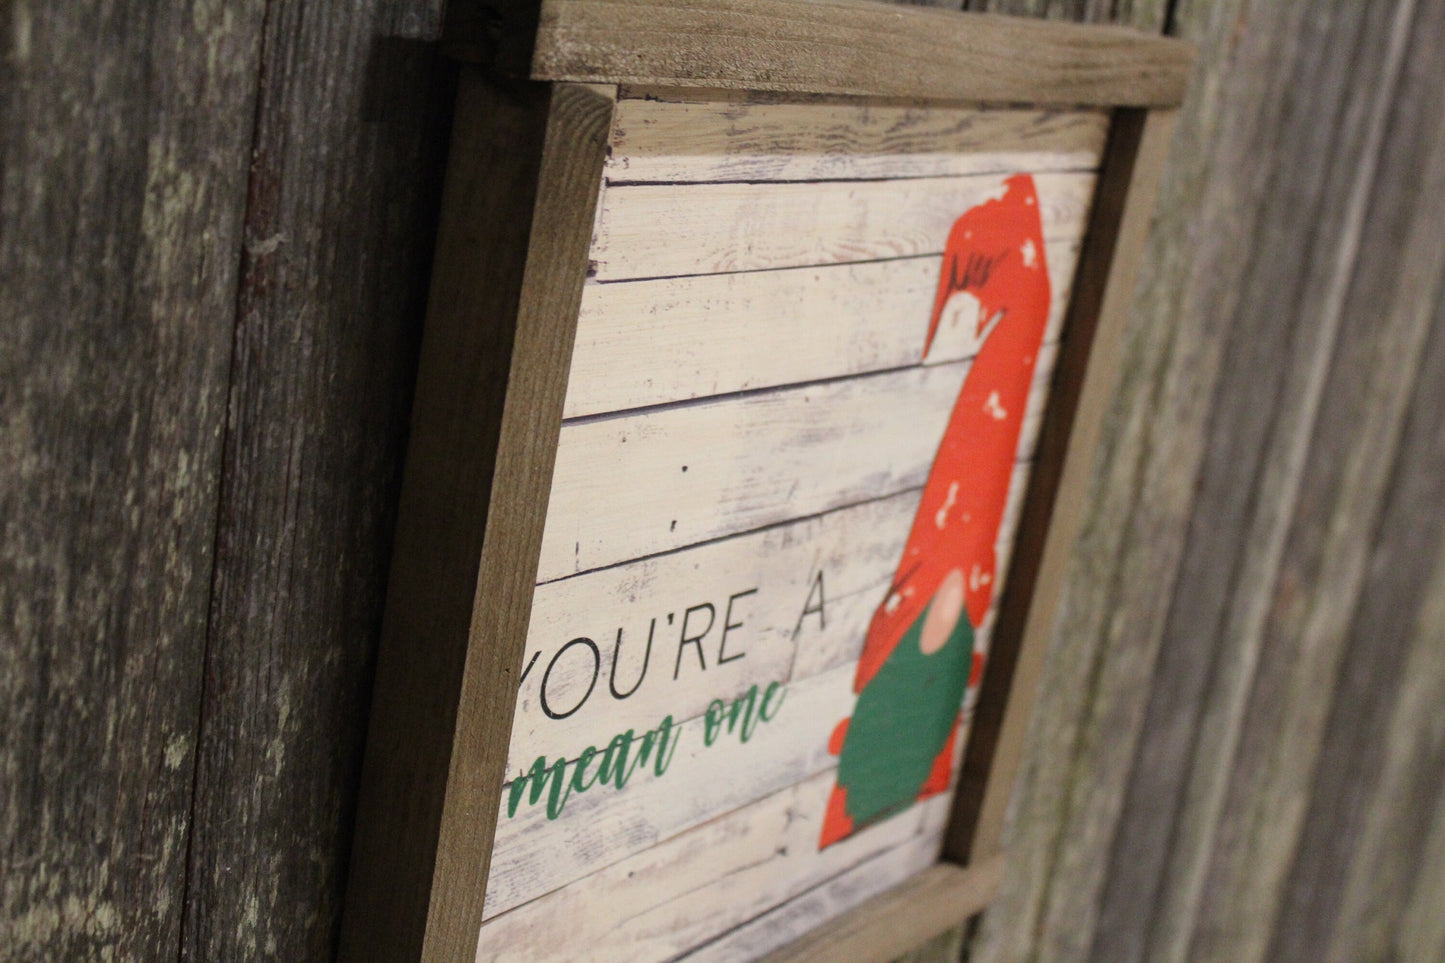 Gnome Your A Mean One Wood Sign Elf Green Beard Cute Funny Christmas Decoration Farmhouse Décor Framed Rustic Primitive Printed